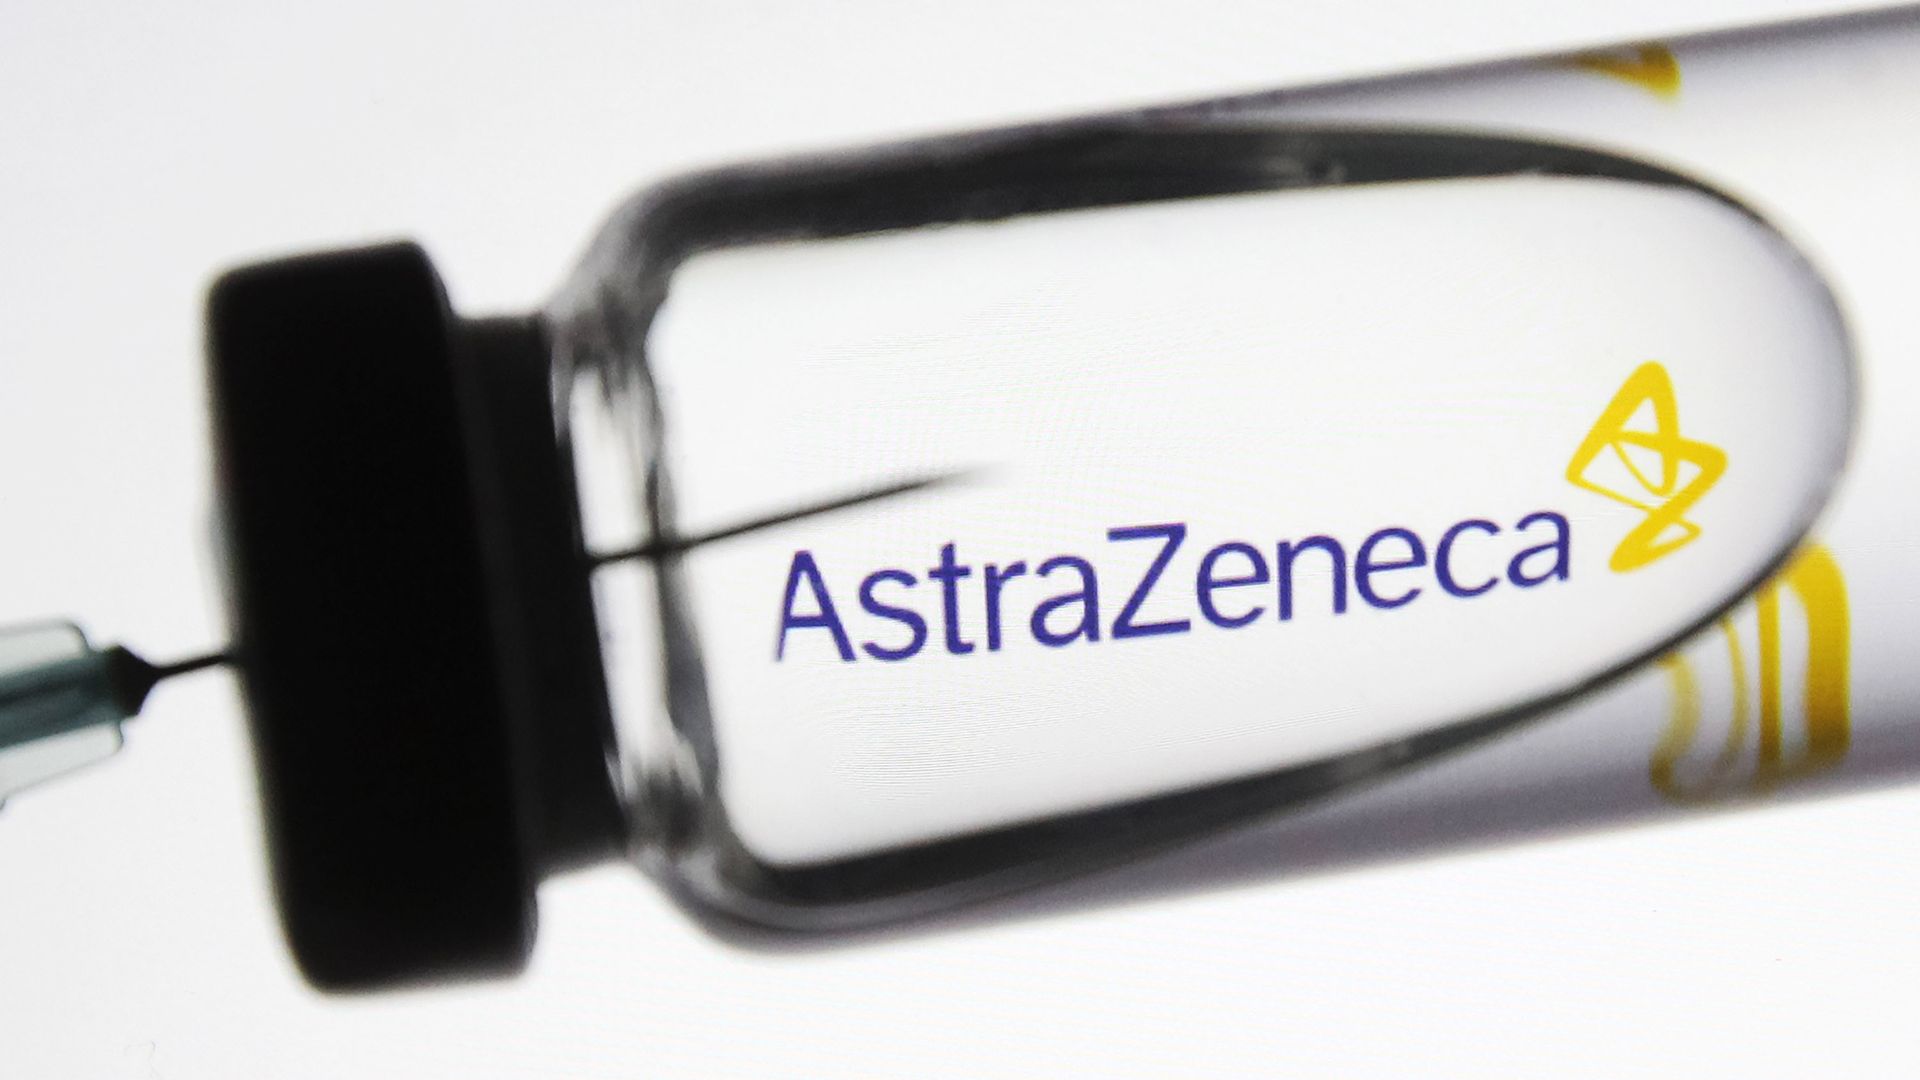 AstraZeneca CEO: "We need to do an additional study" on COVID vaccine -  Axios